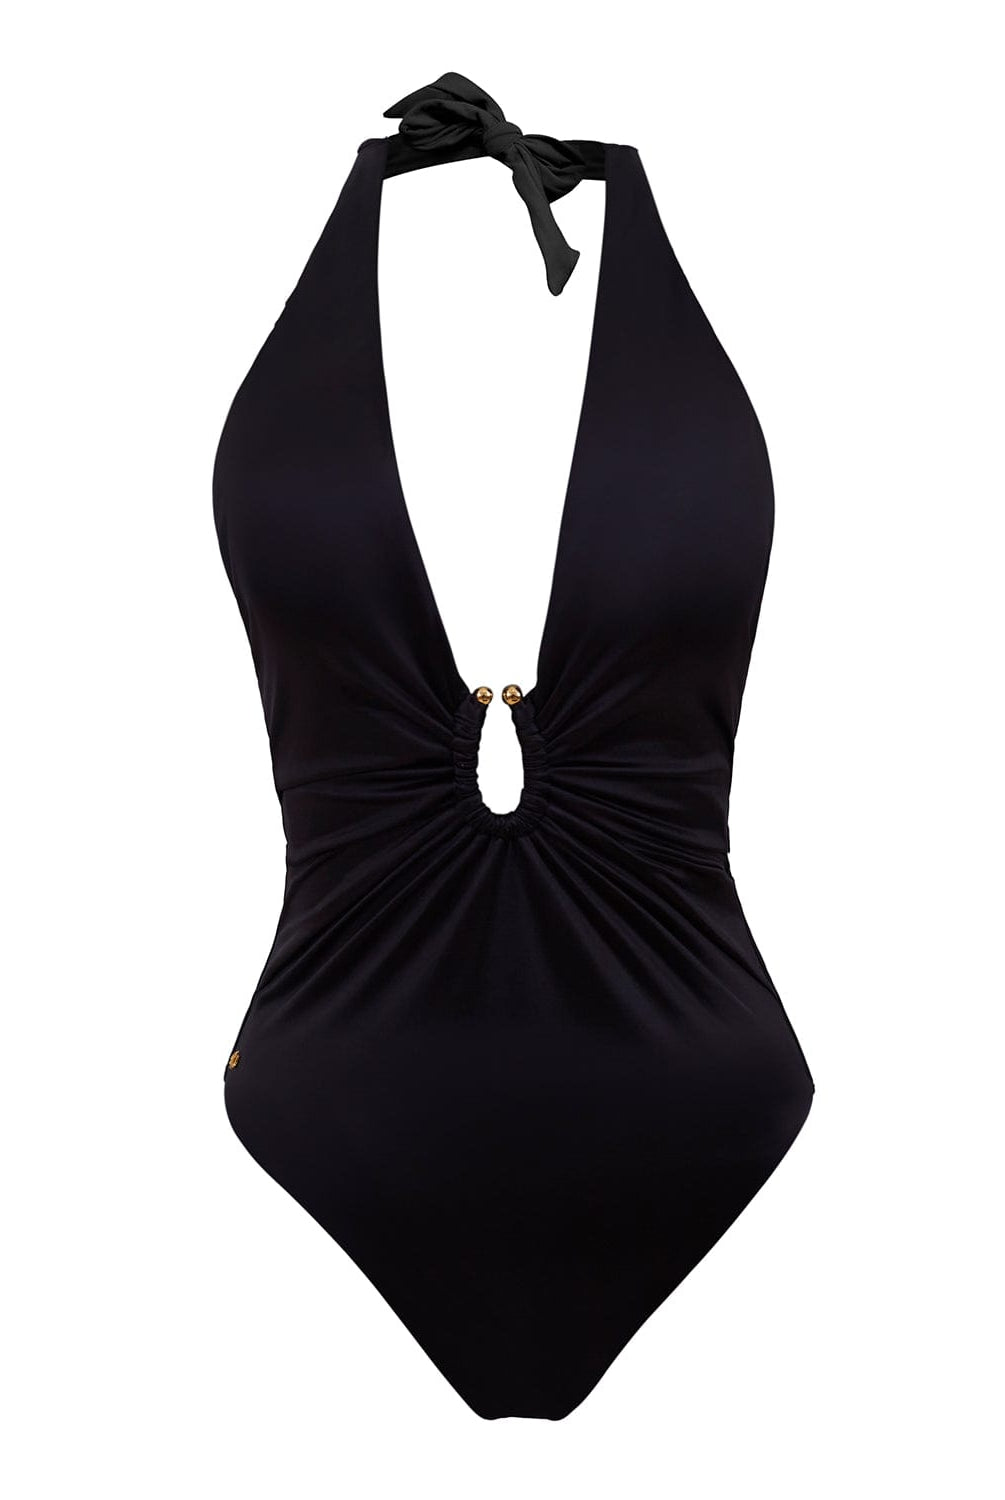 A black one piece swimsuit against a white wall. 